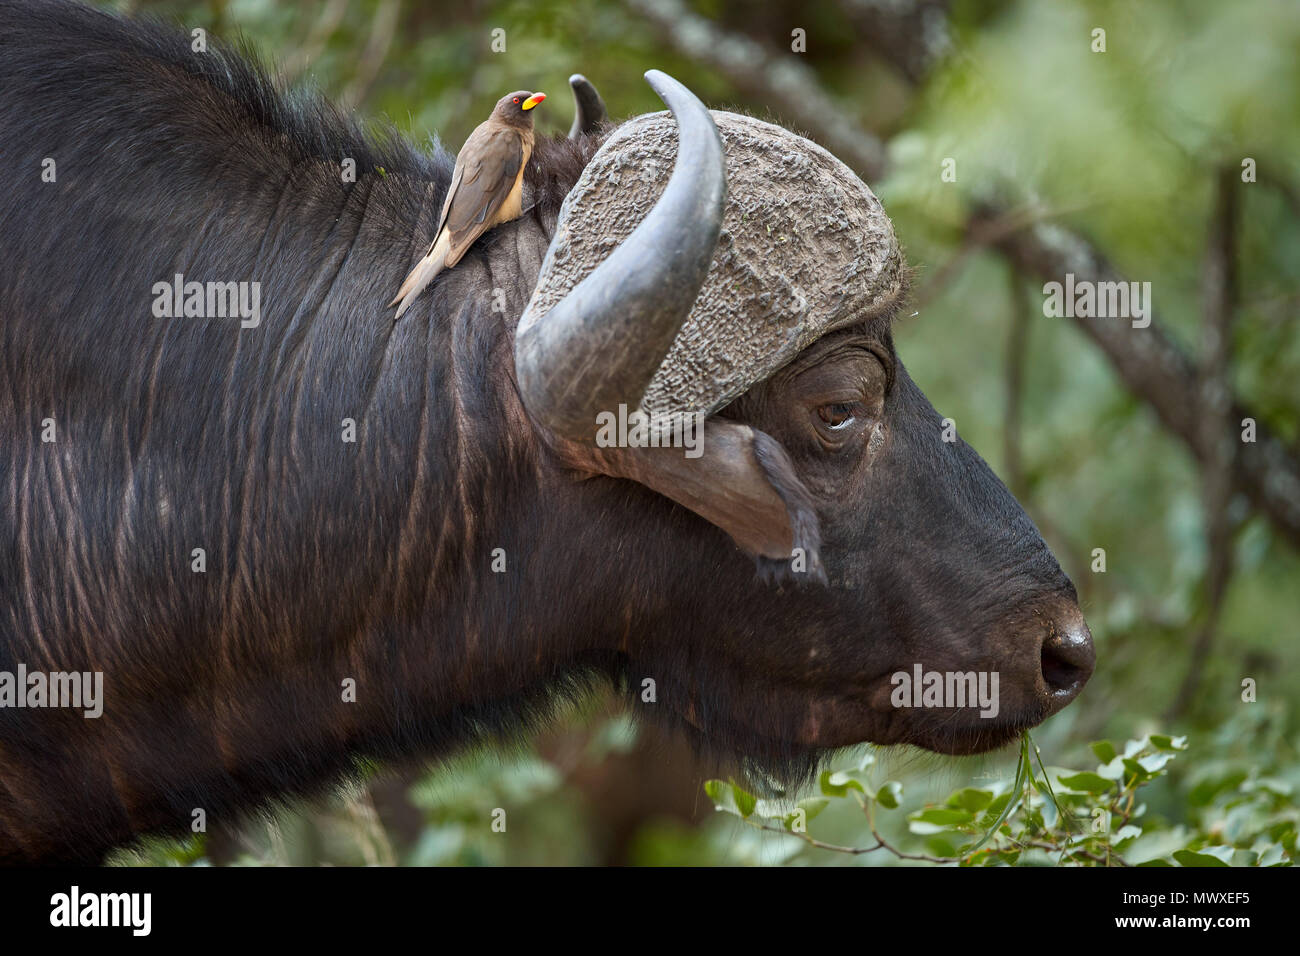 Cape Buffalo (Syncerus caffer) with a Yellow-billed Oxpecker (Buphagus africanus), Kruger National Park, South Africa, Africa Stock Photo